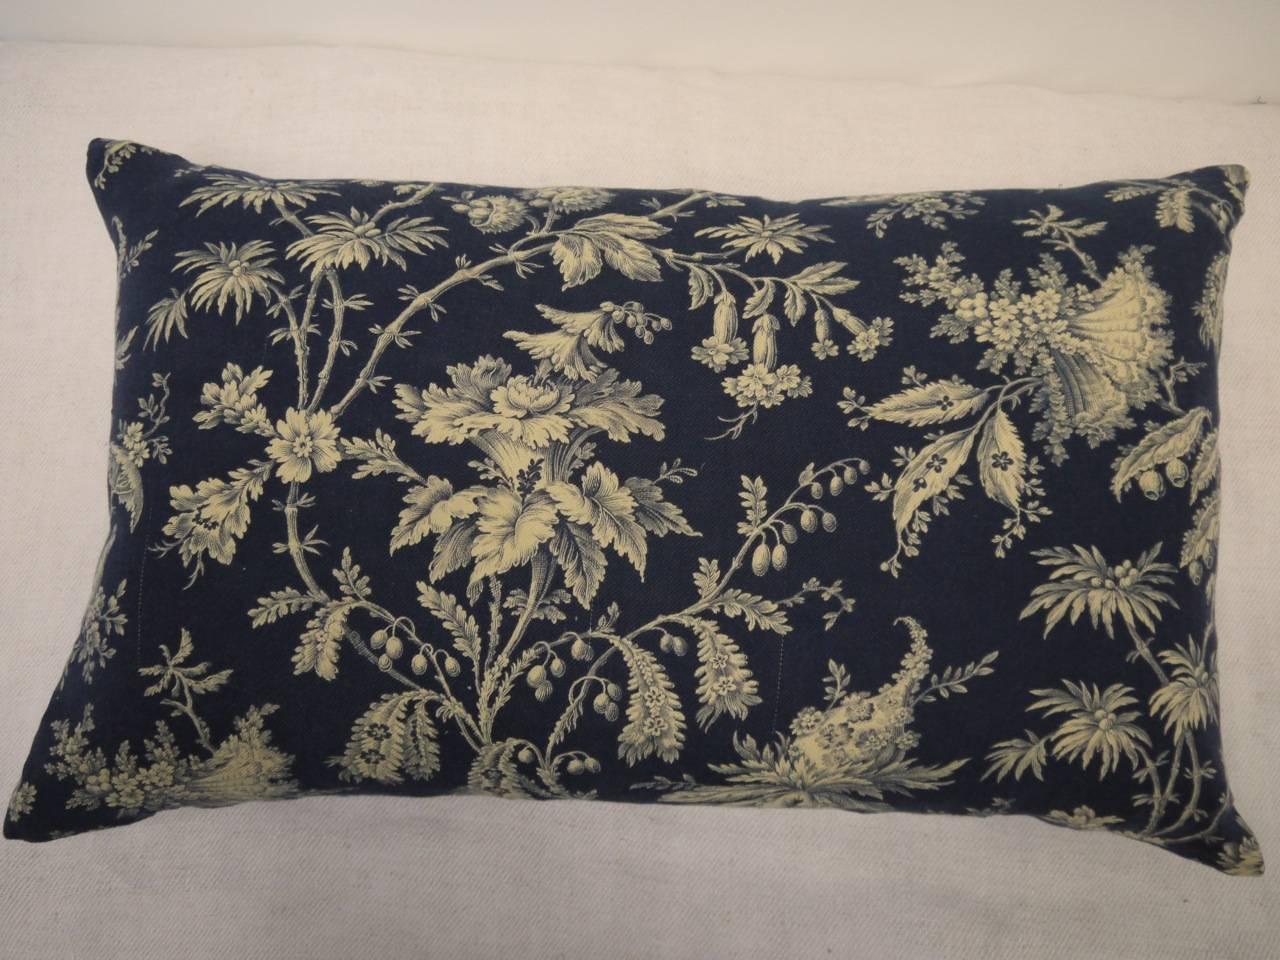 19th Century French Antique Printed Floral Cotton Pillow For Sale 3